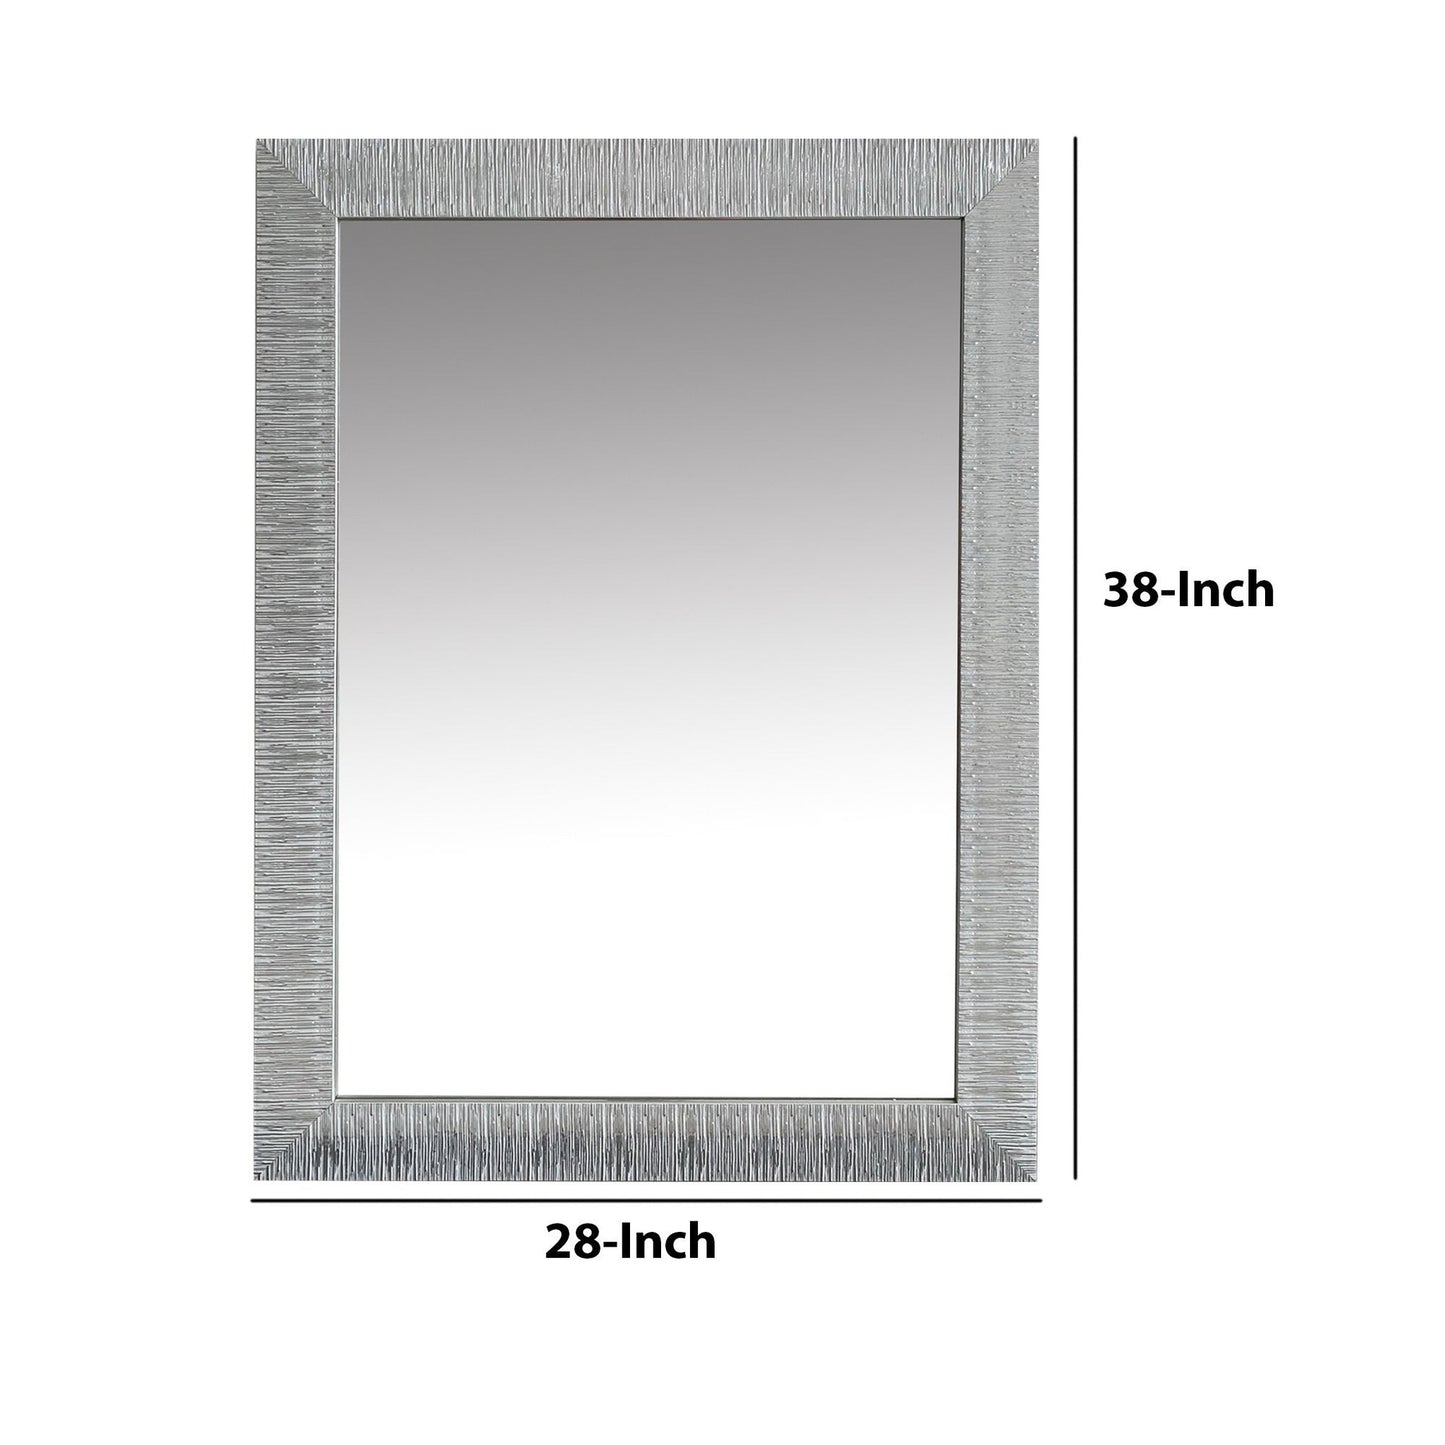 Benzara 39" Gray Wooden Framed Wall Mirror With Striped Motif Edges and Shimmering Leaf